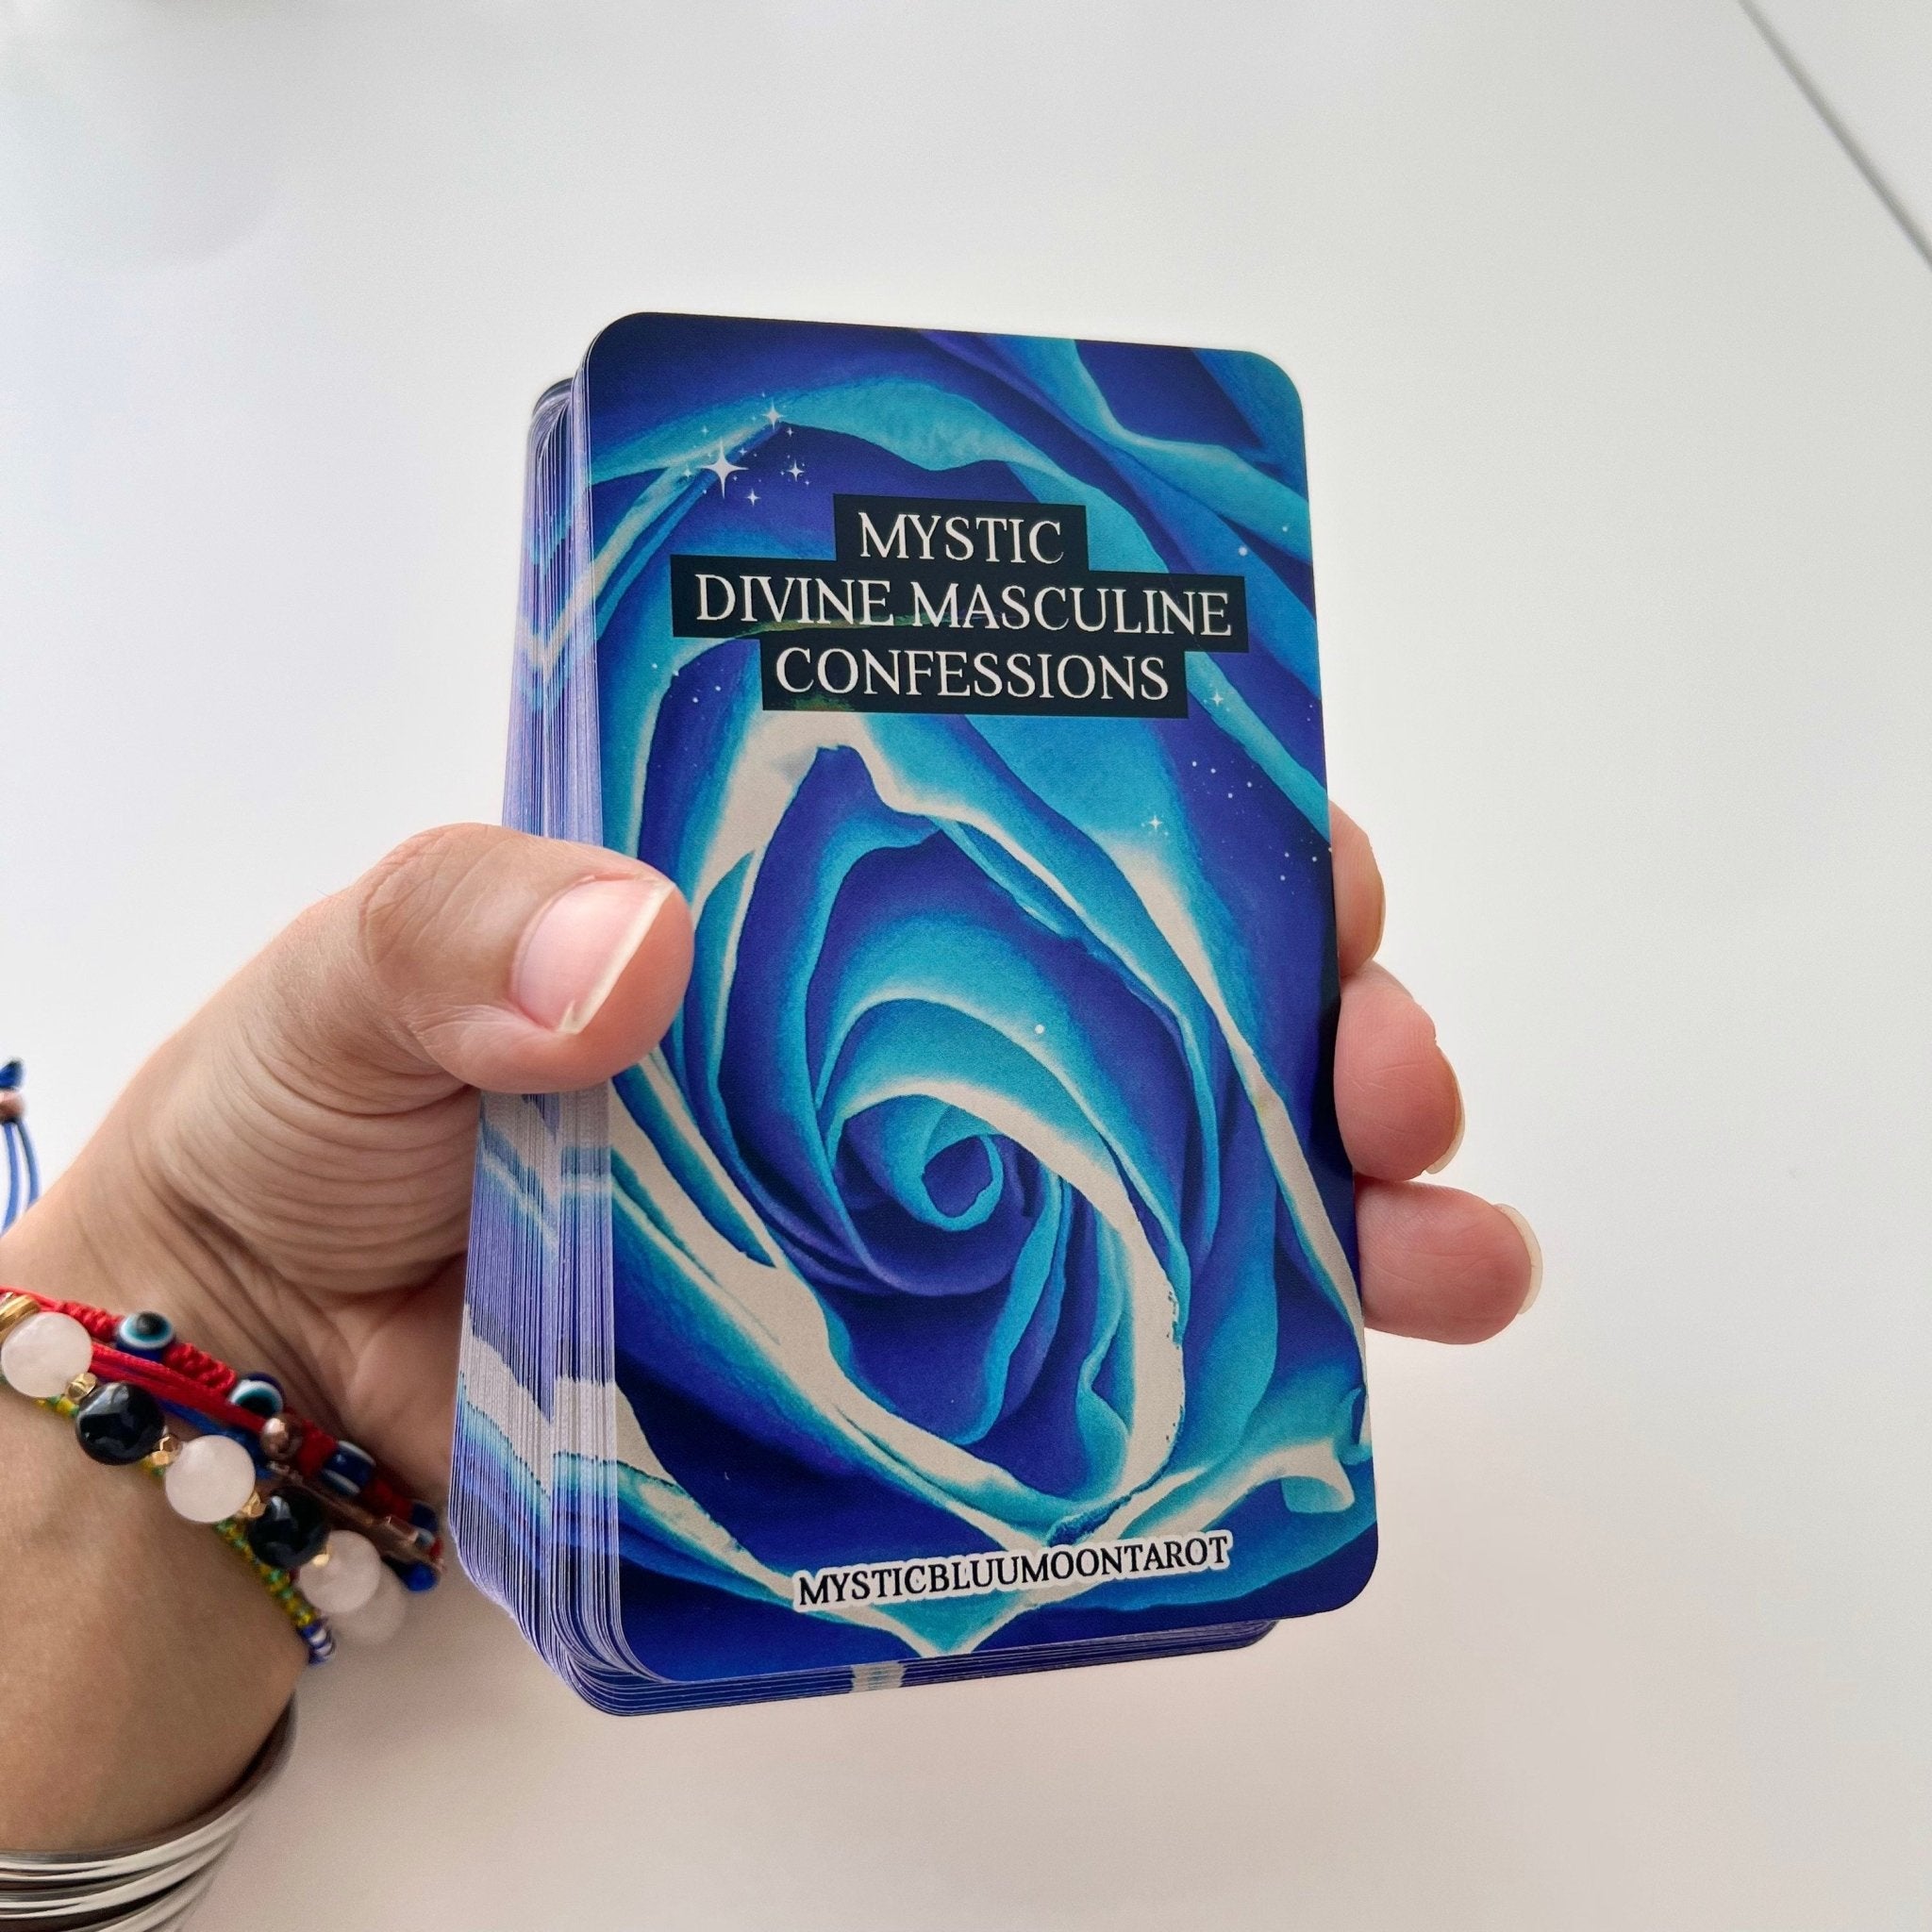 Mystic Divine Masculine Oracle Deck | Confessions Messages Deck | Twin Flame Deck | Love Oracle Cards 78 Cards - MysticBluuMoonTarot